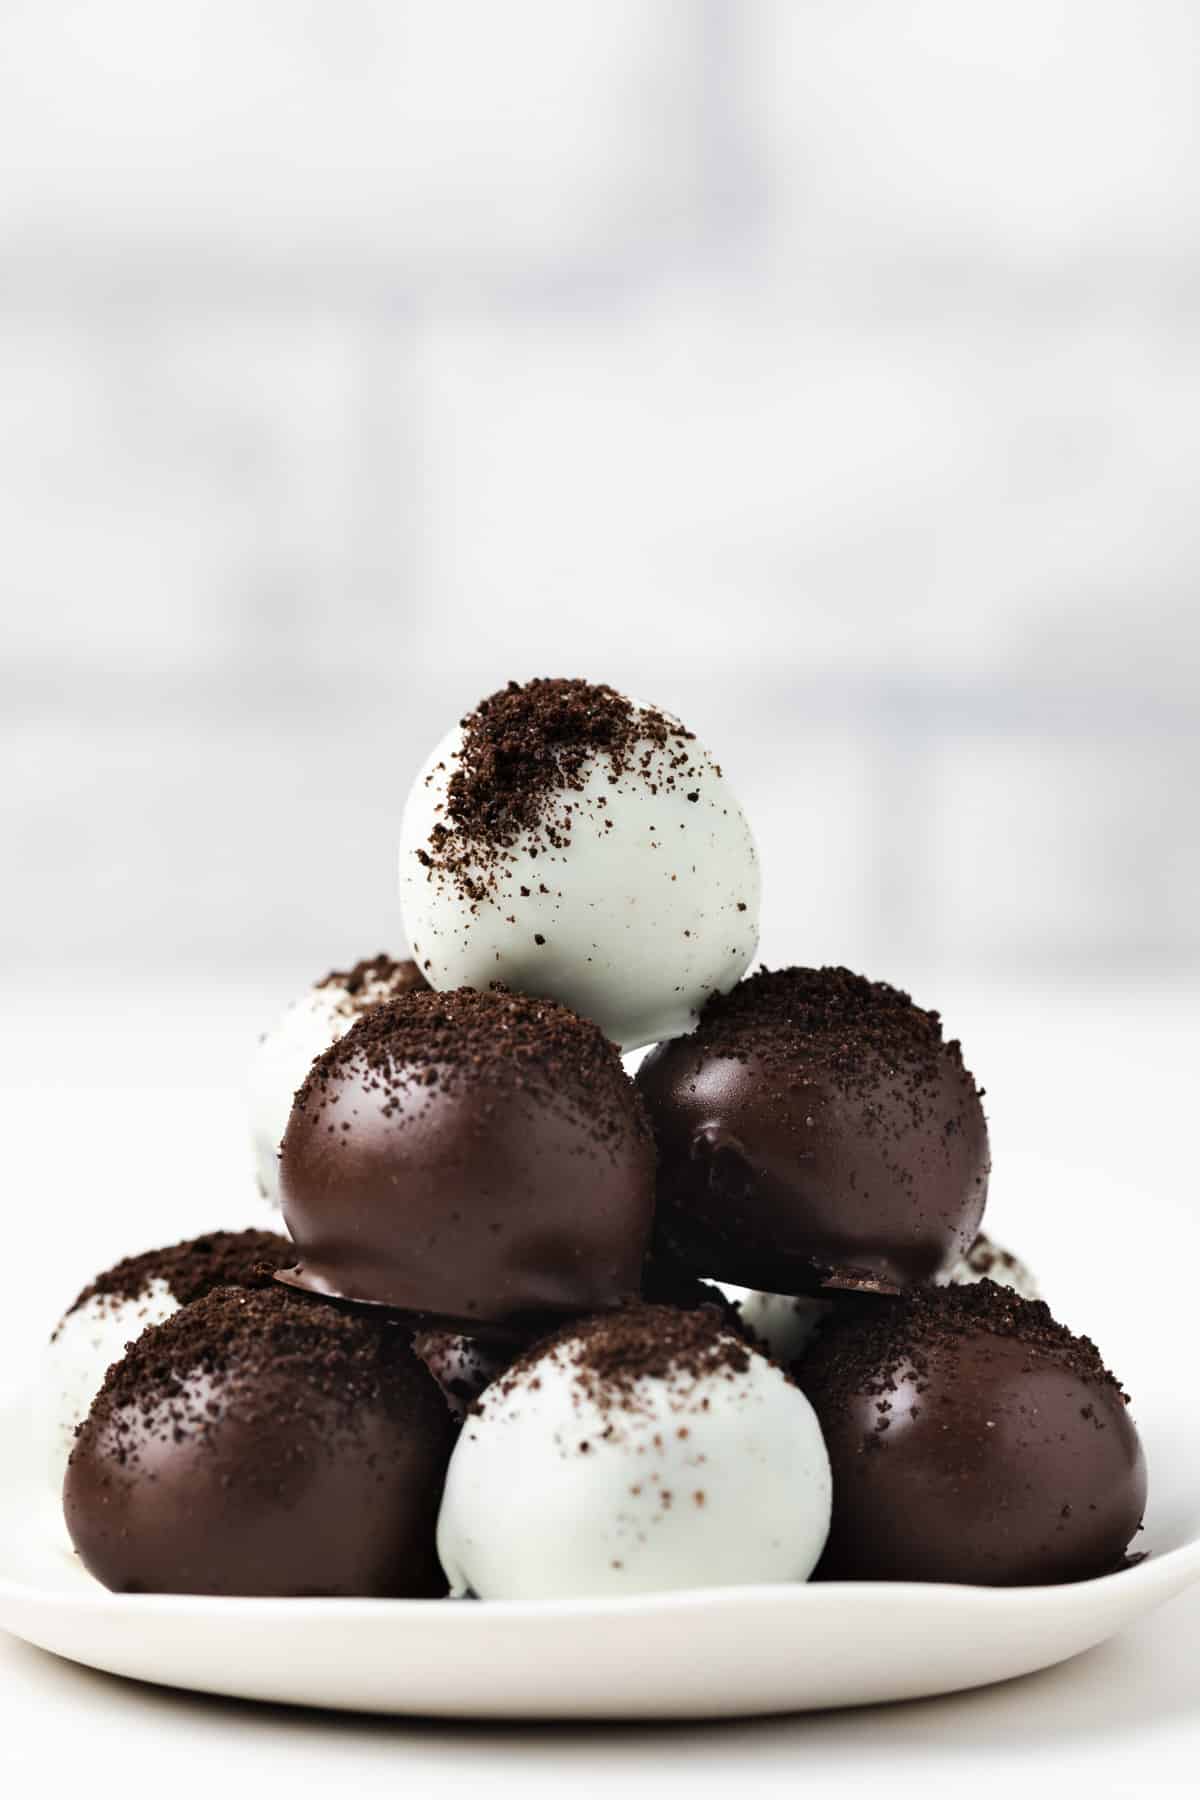 Side view of Oreo balls on white plate.